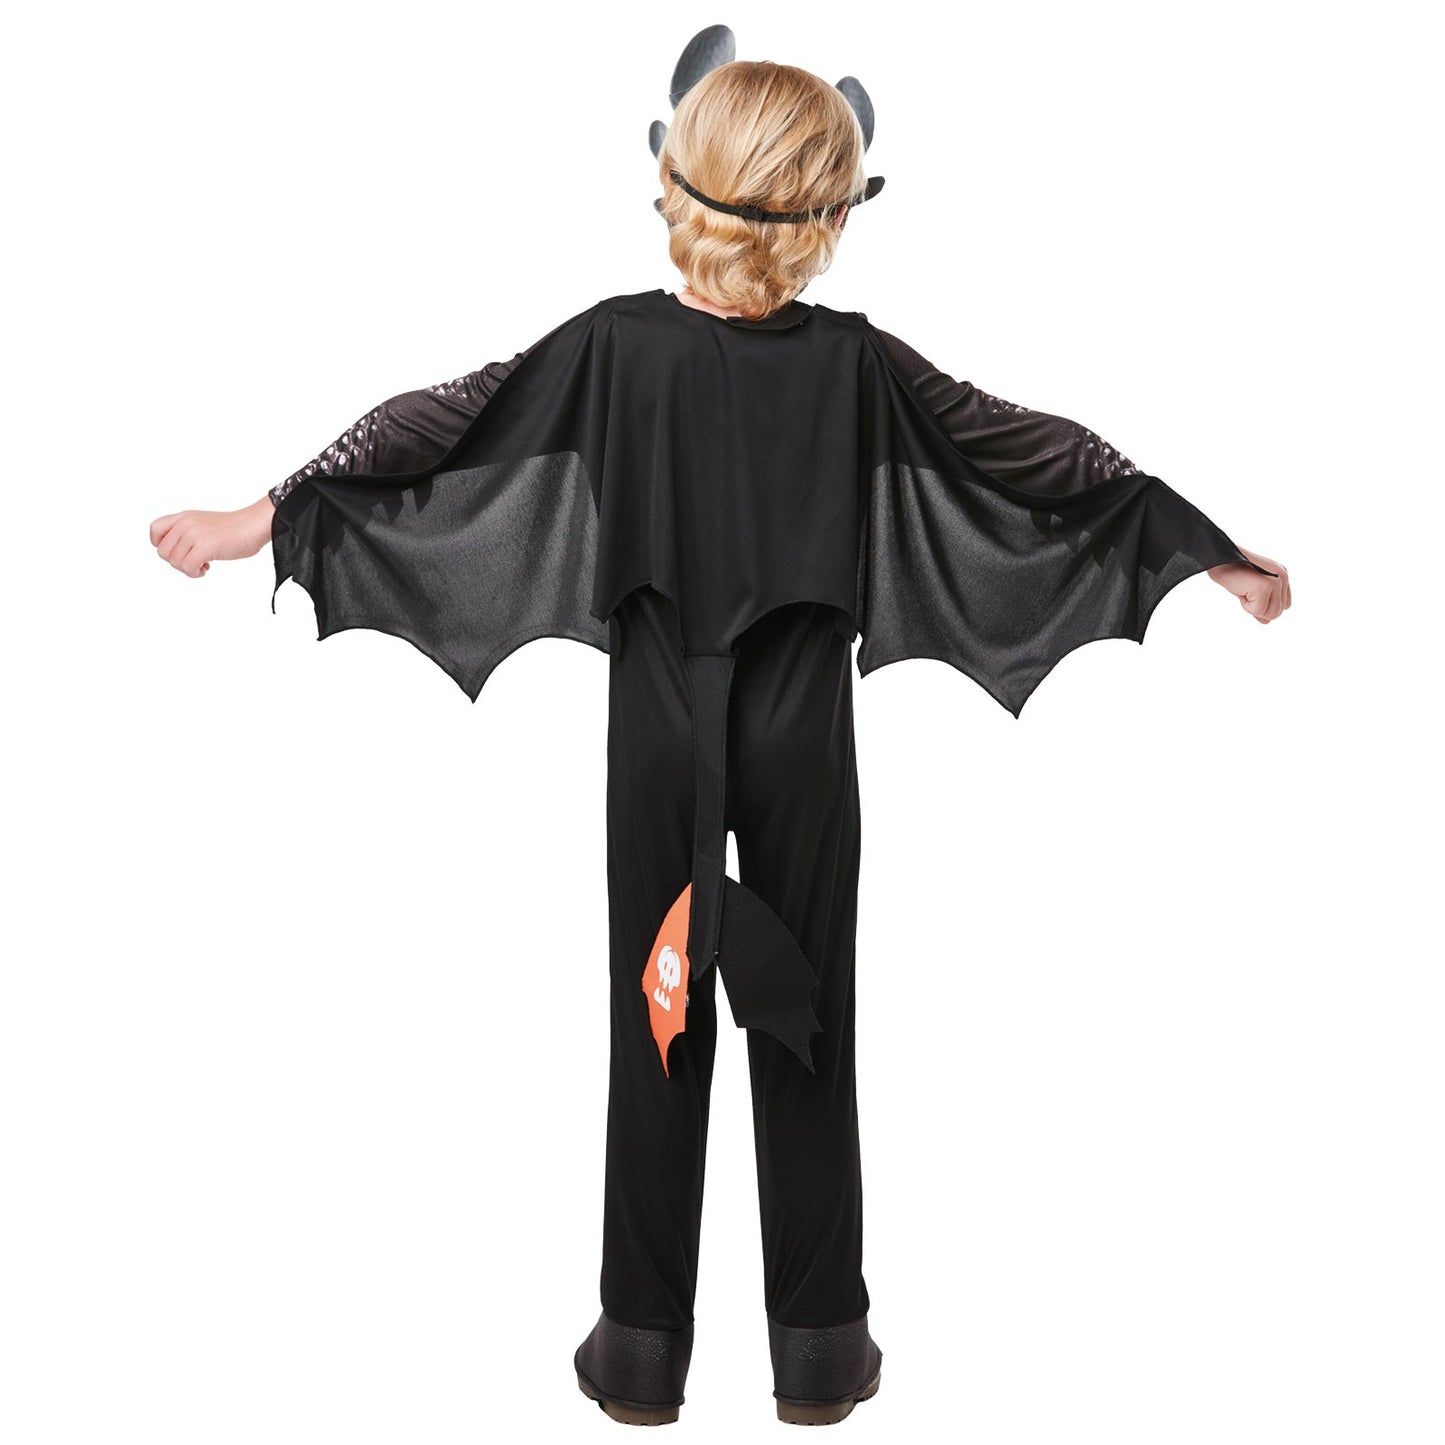 How to Train Your Dragon Toothless Kids Costume